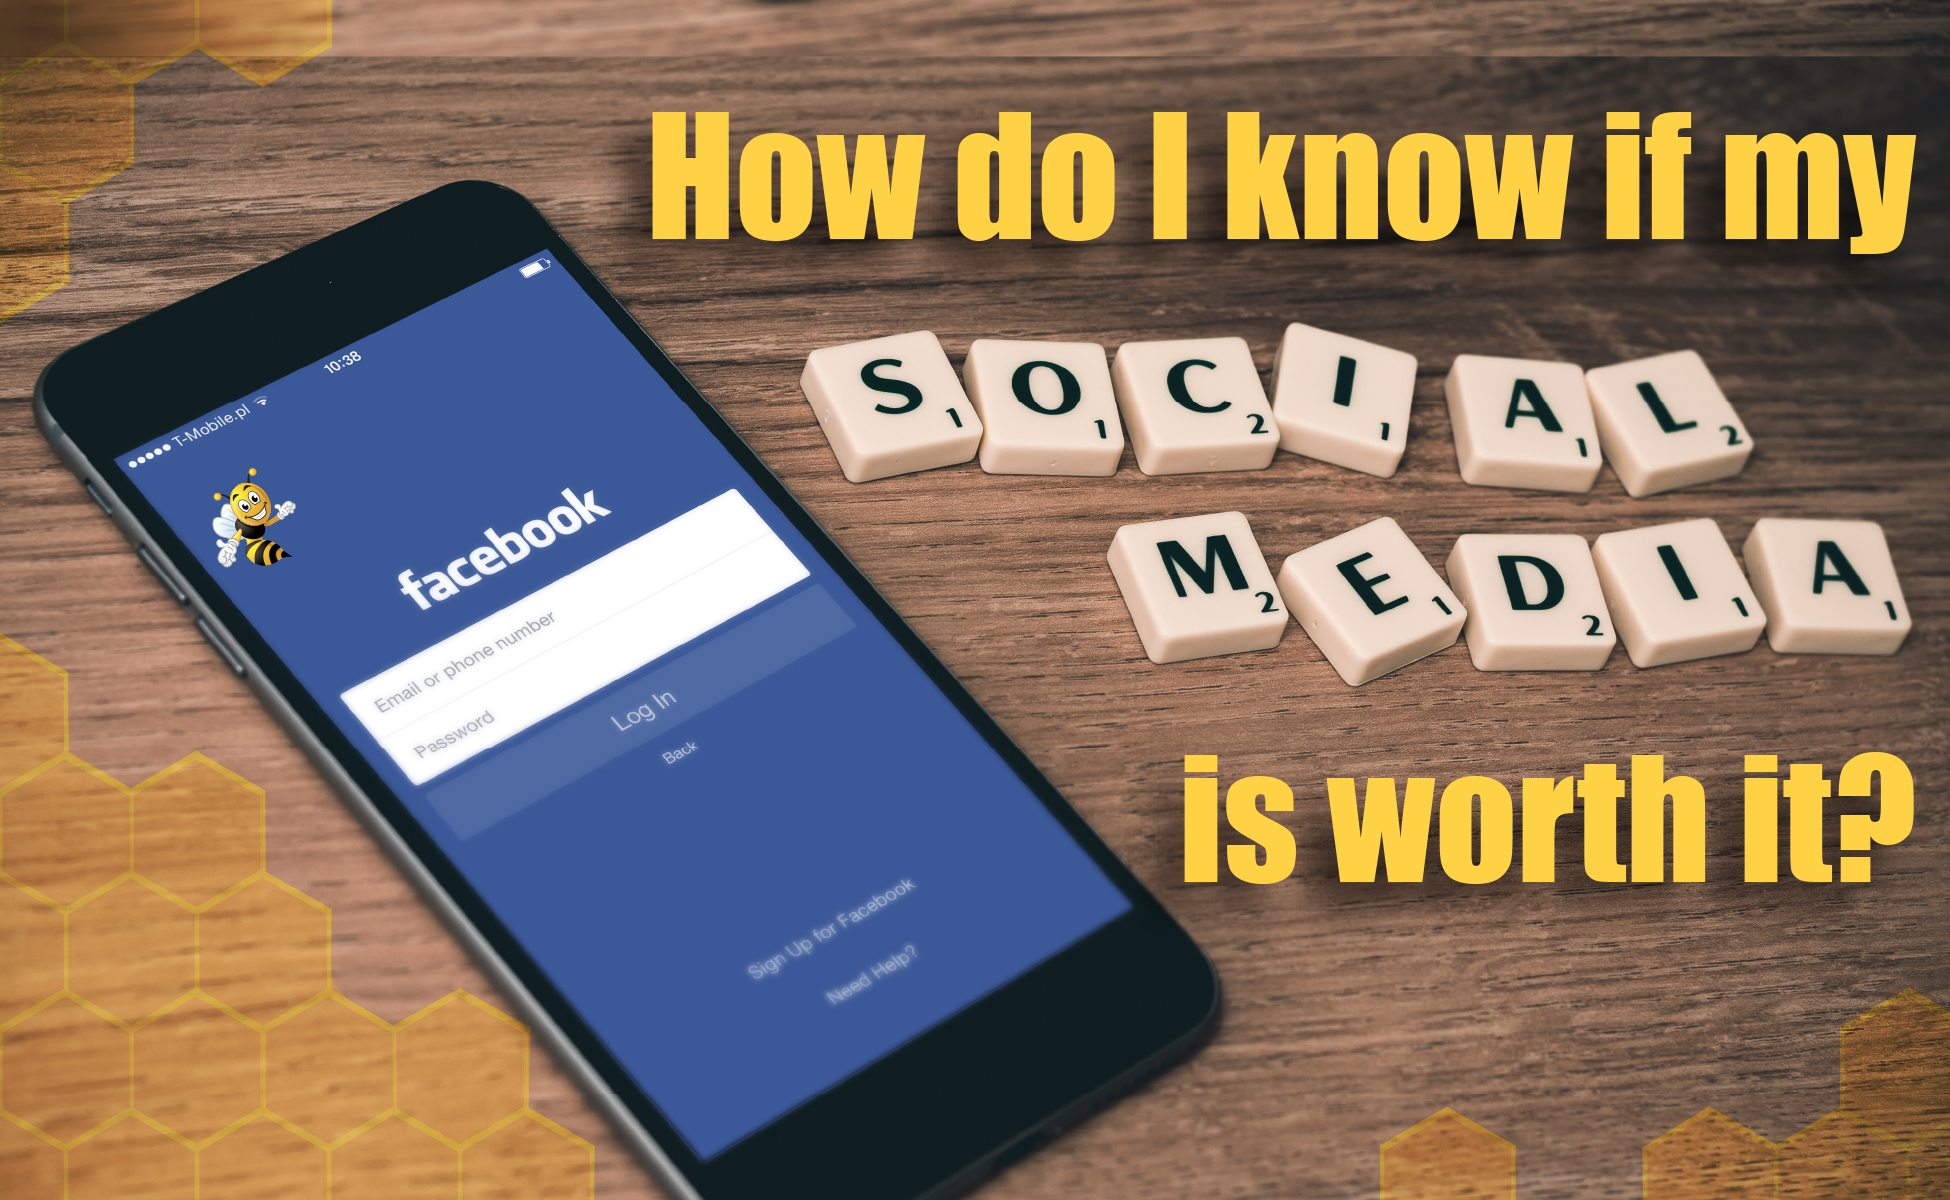 How Do I Know if My Social Media is “Worth It”?